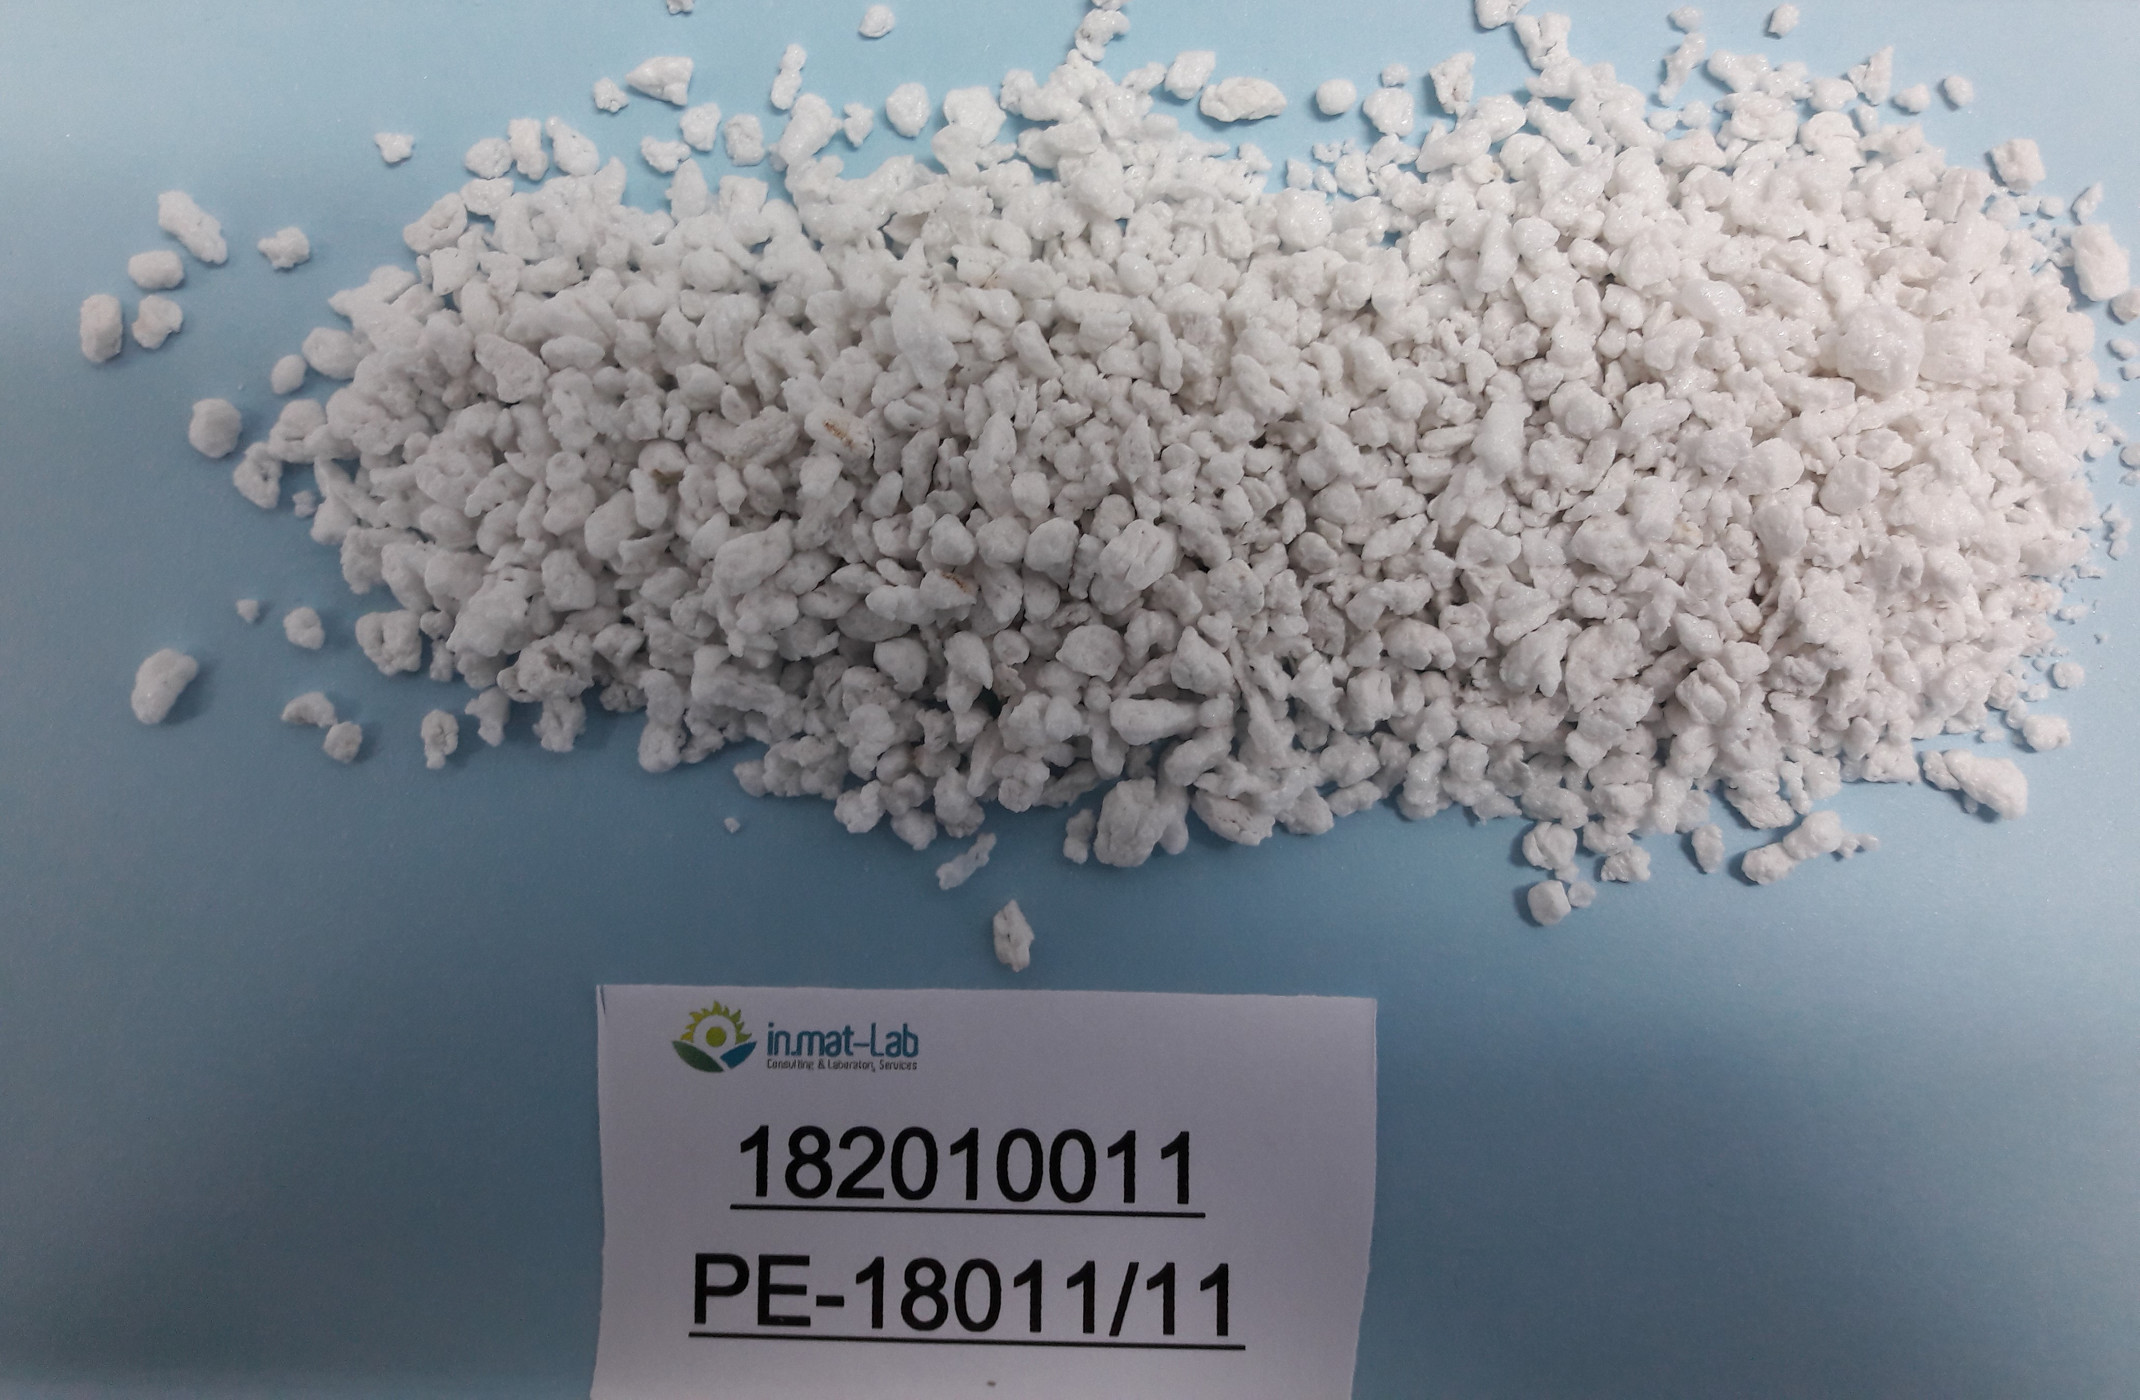 Horticultural Grade Expanded Perlite from NewPerl Project